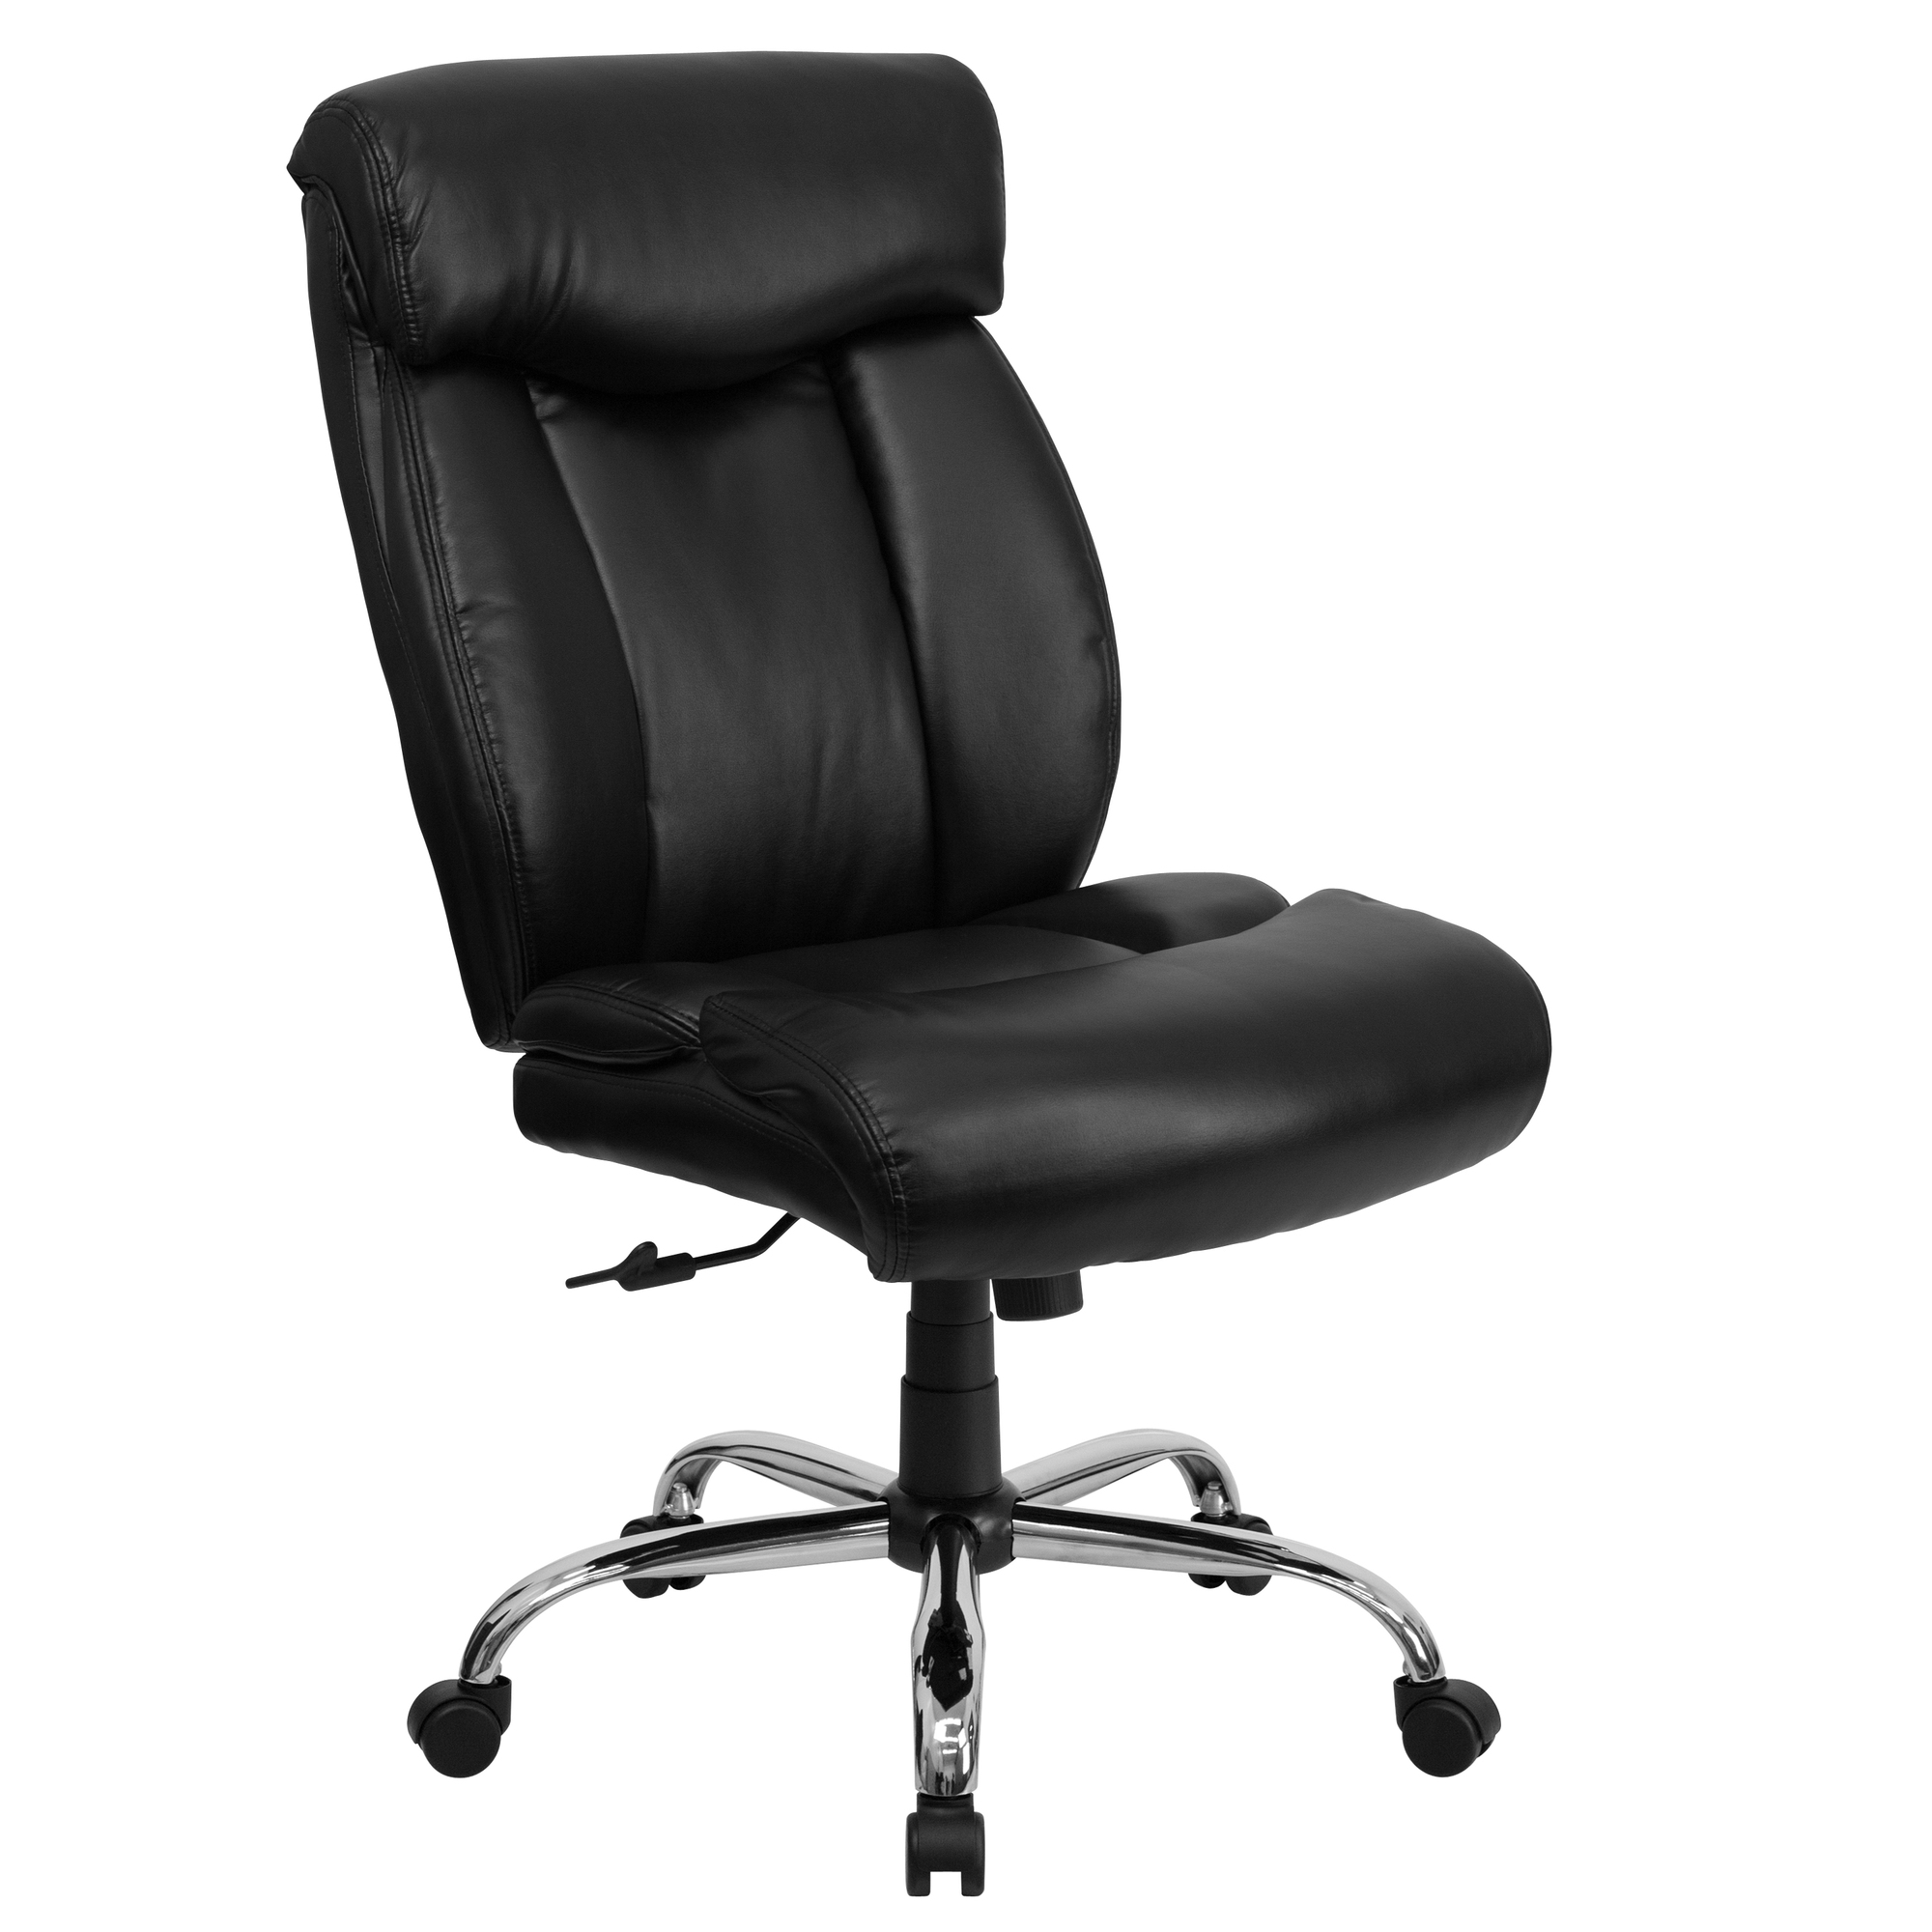 Flash Furniture, Big Tall 400 lb. Rated Black LeatherSoft Chair, Primary Color Black, Included (qty.) 1, Model GO1235BKLEA